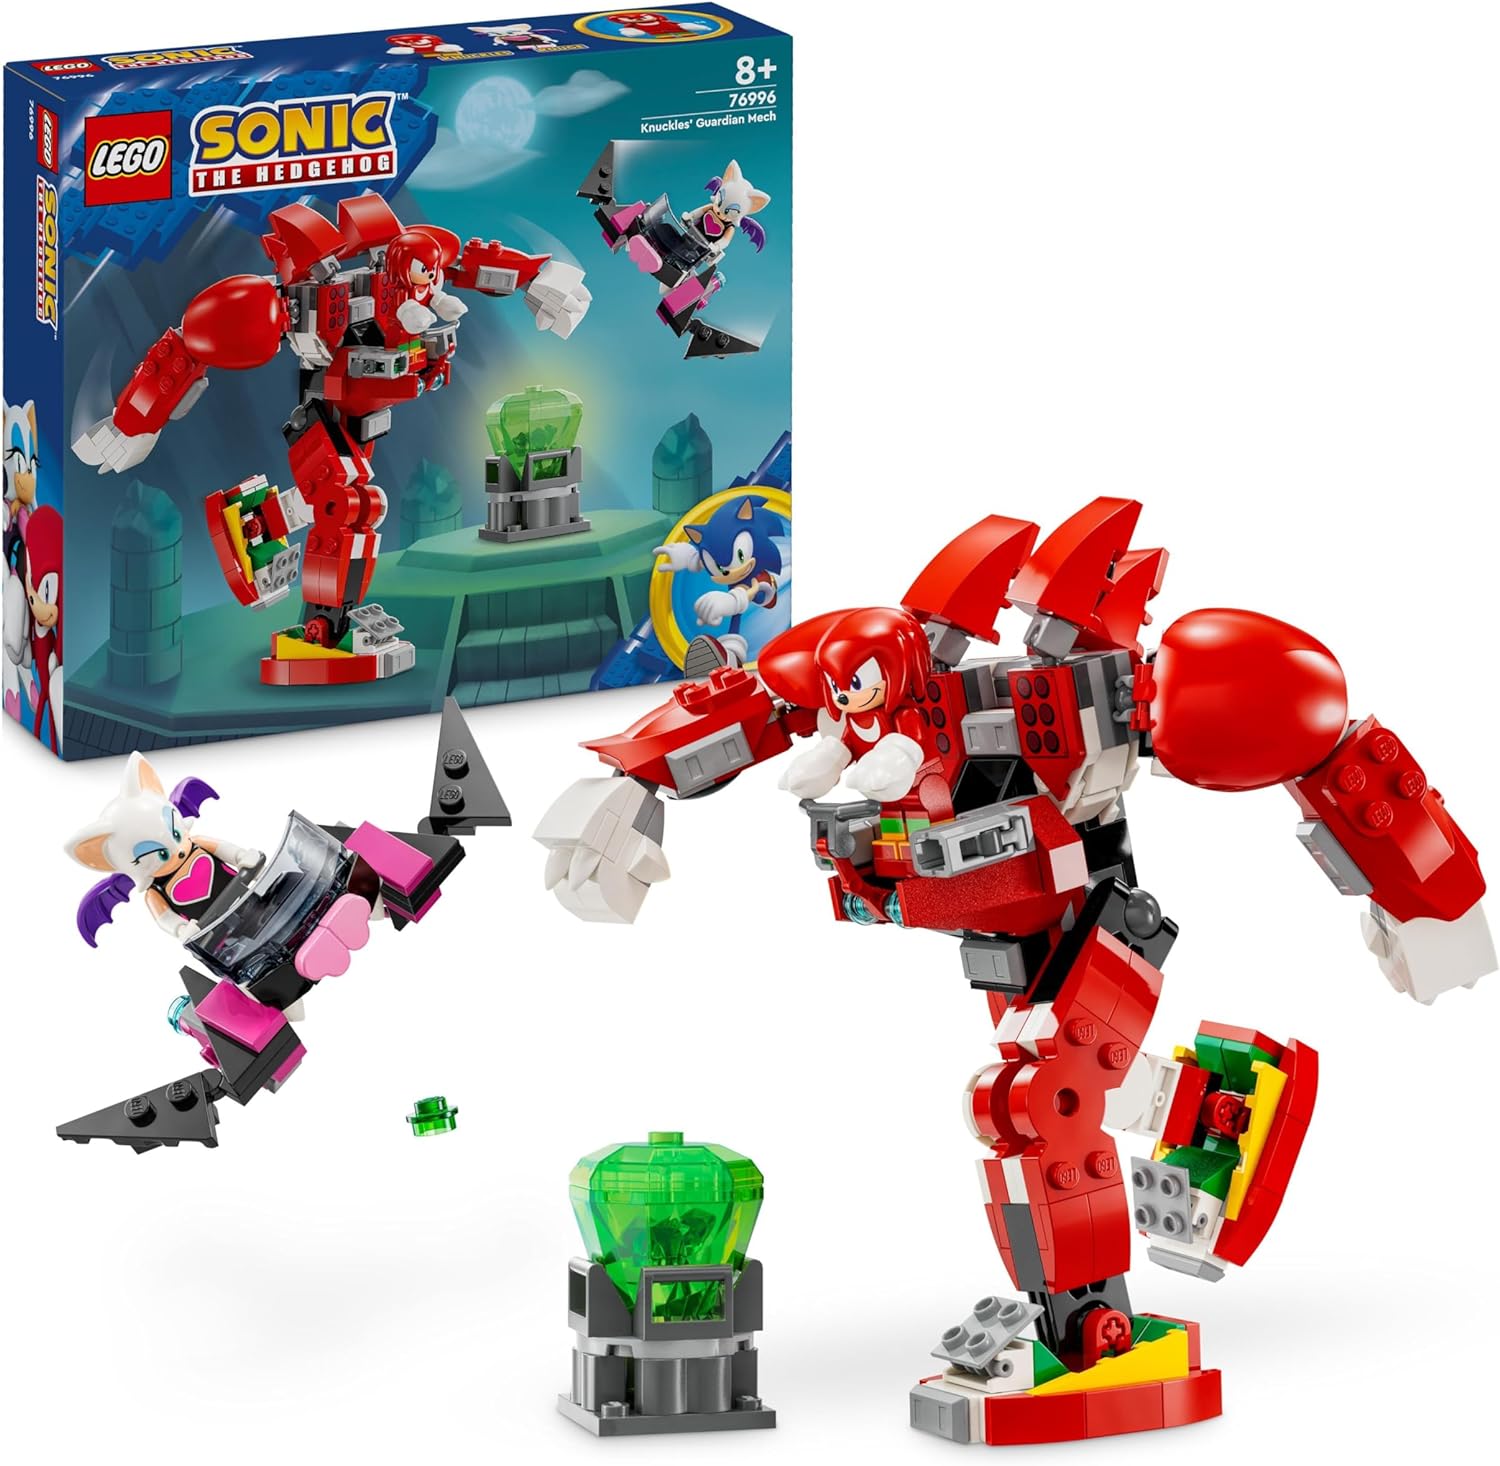 LEGO Sonic The Hedgehog Knuckles\' Guardian Mech Action Figure Toy for Boys and Girls from 8 Years, with Master Emerald and Other Figures from the Video Game, Gift Idea for Children 76996